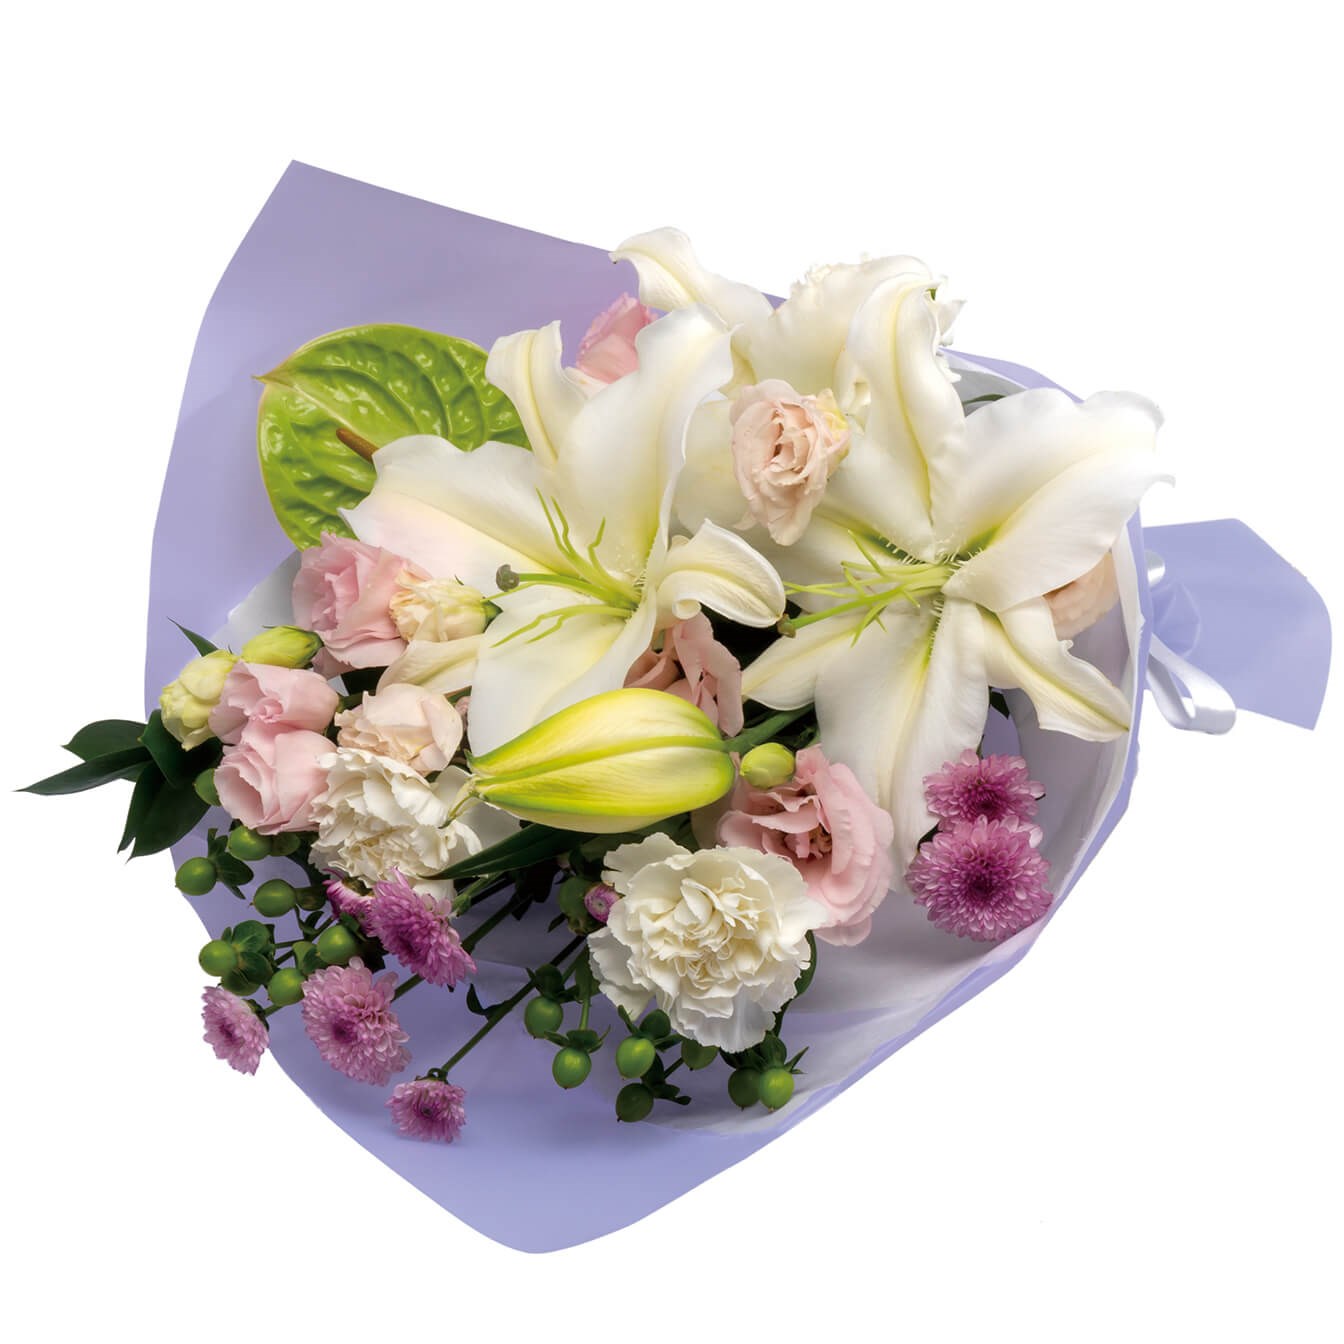 Sympathy bouquet in white with some pastel colors